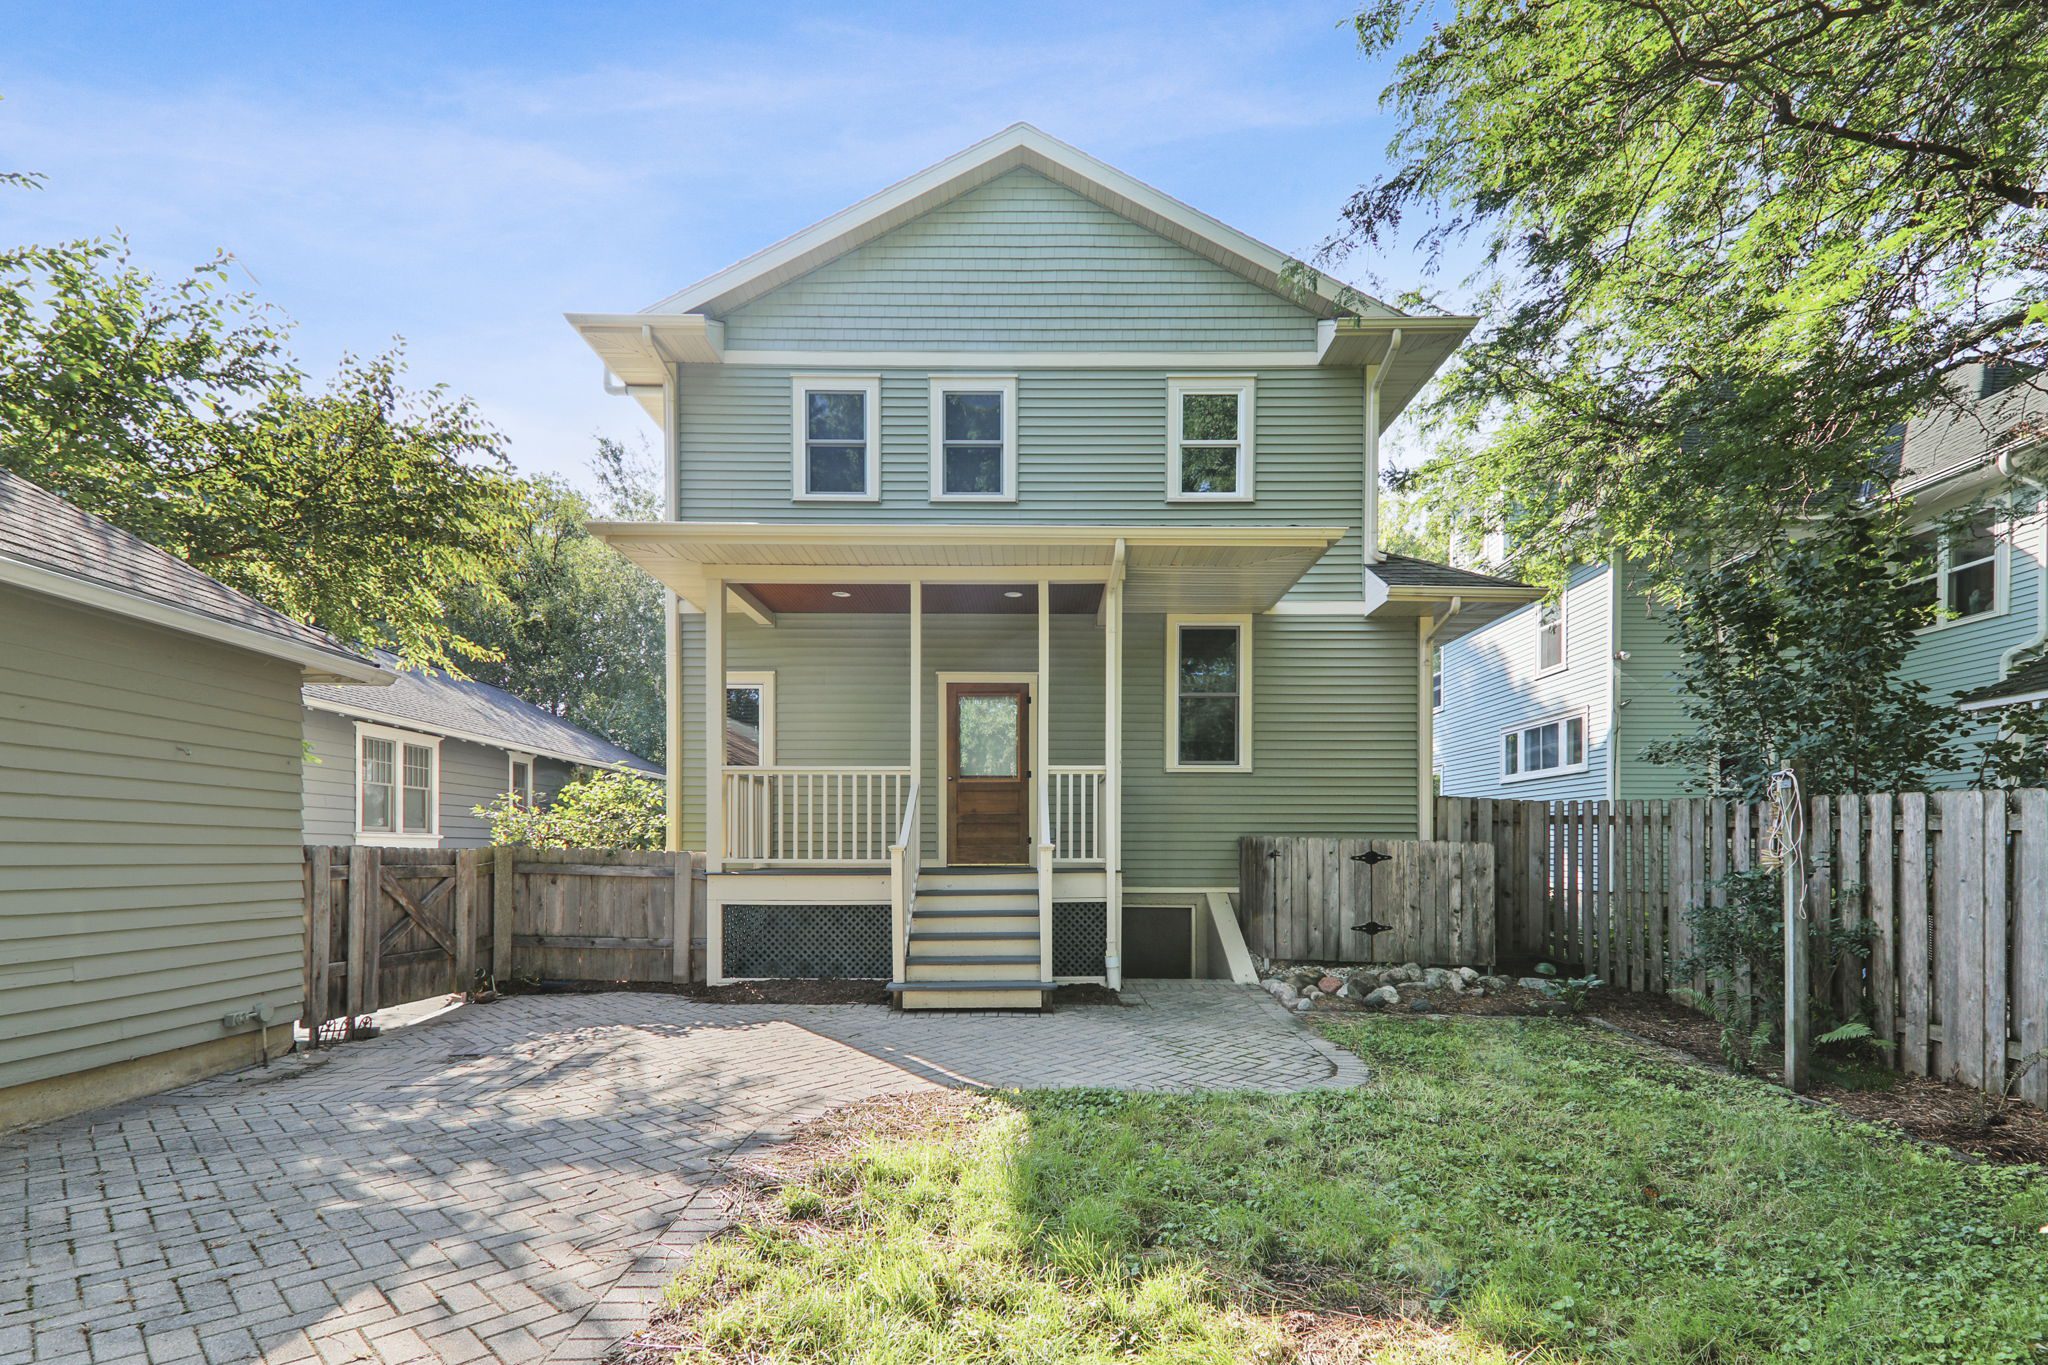 4-web-or-mls-2218-west-lawn-ave